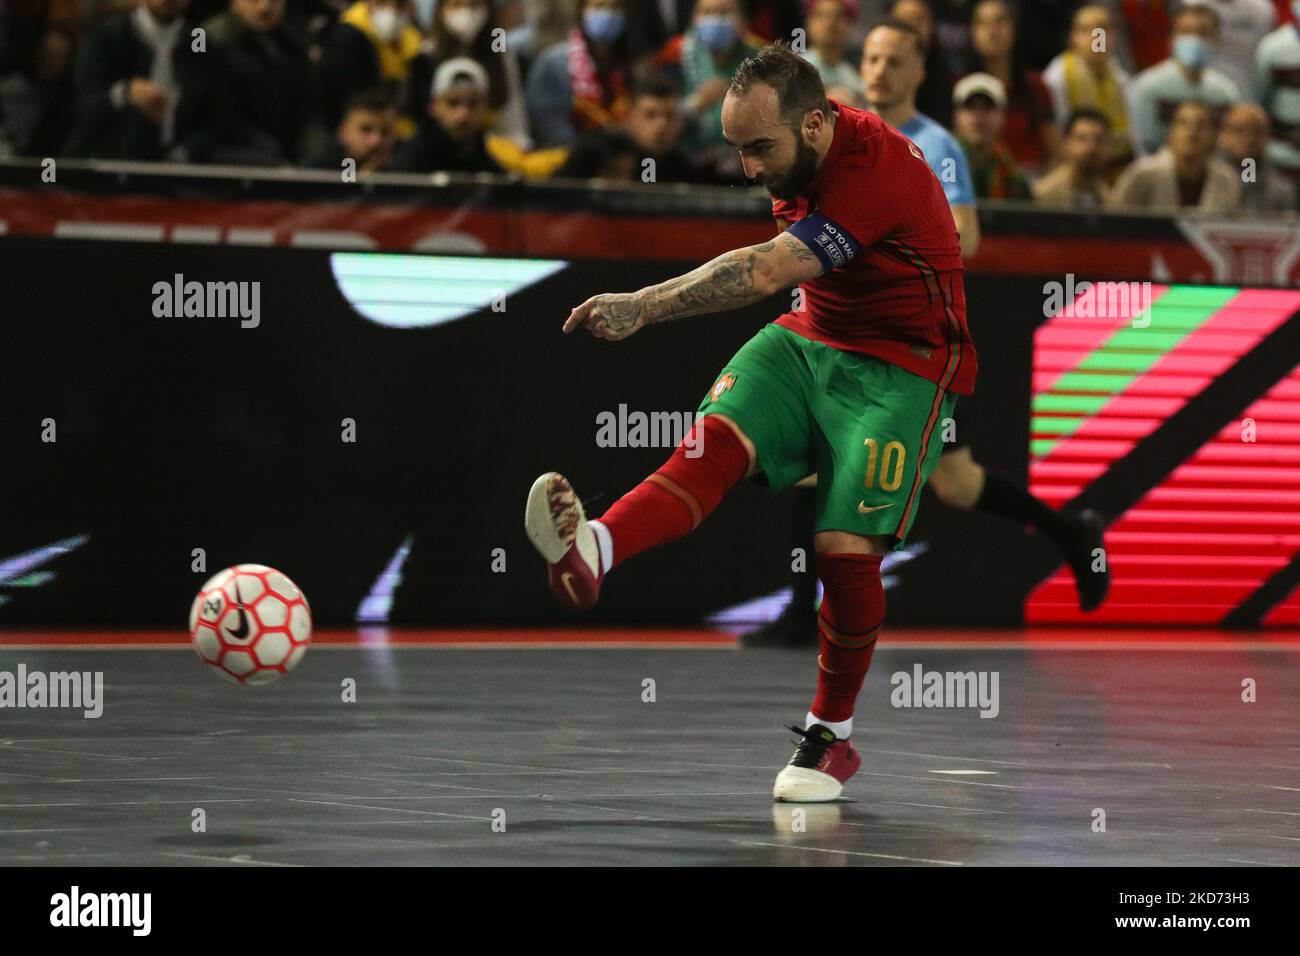 Ricardinho of Portugal score a goal in action during the UEFA Preparation  Futsal Teams 2022 match between Portugal and Belgium at the Multiusos de  Gondomar on April 7, 2022 in Gondomar, Portugal. (